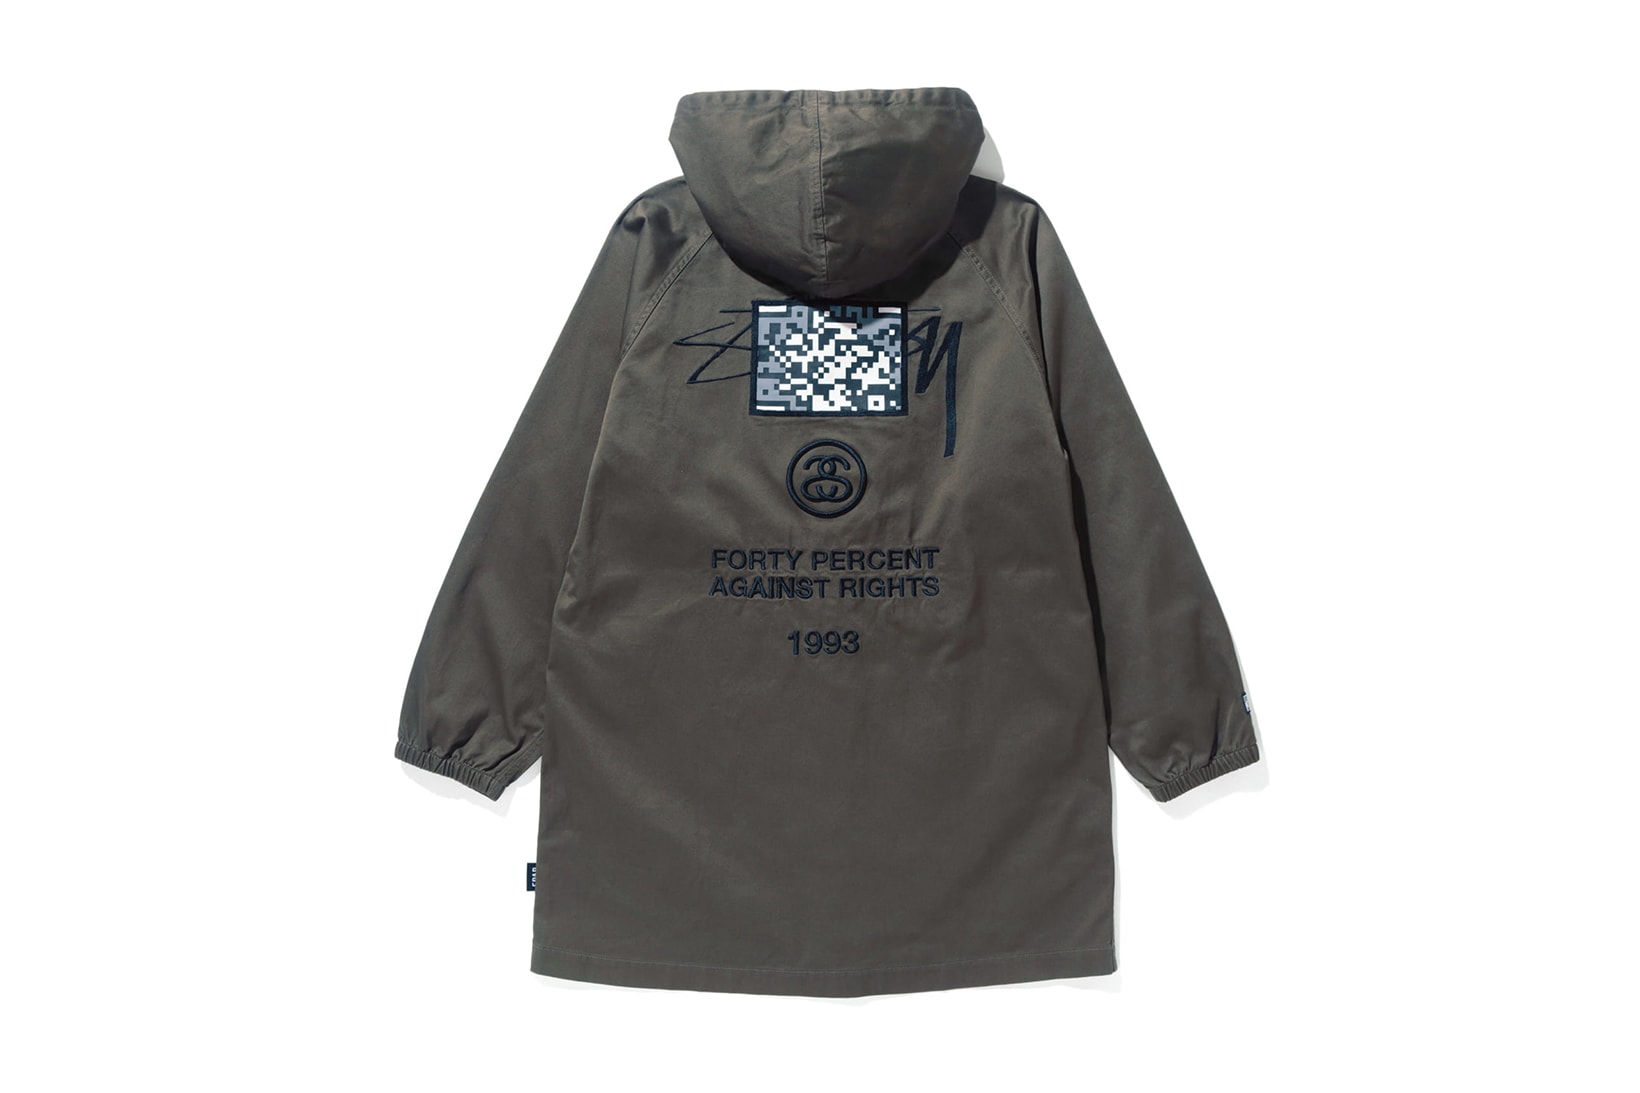 Stussy FORTY PERCENTS AGAINST RIGHTS Parka FPAR 2017 Fall Winter Olive Drab Green Collaboration November Release Date Info pop-up collaboration qr code isetan shinjuku embroidery Japan Tetsu Nishiyama